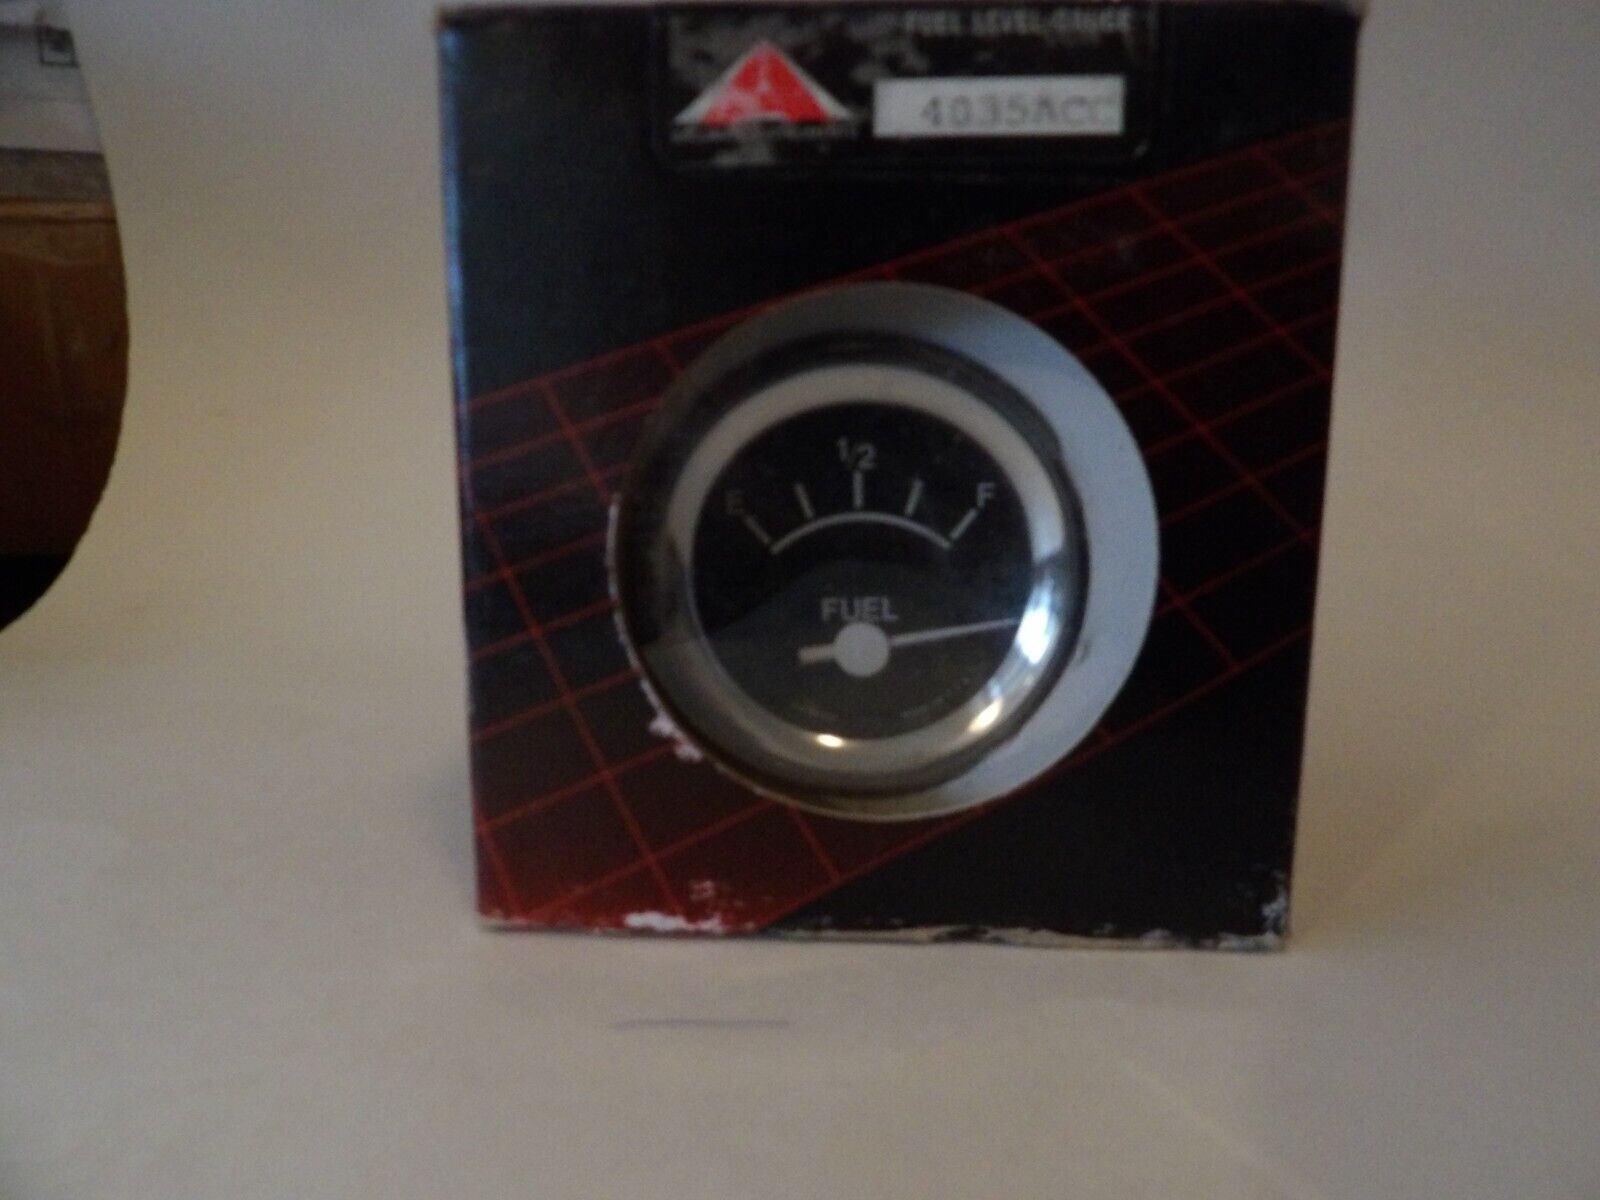 Accurate Instruments  Fuel Gauge #4035ACC     2 inch